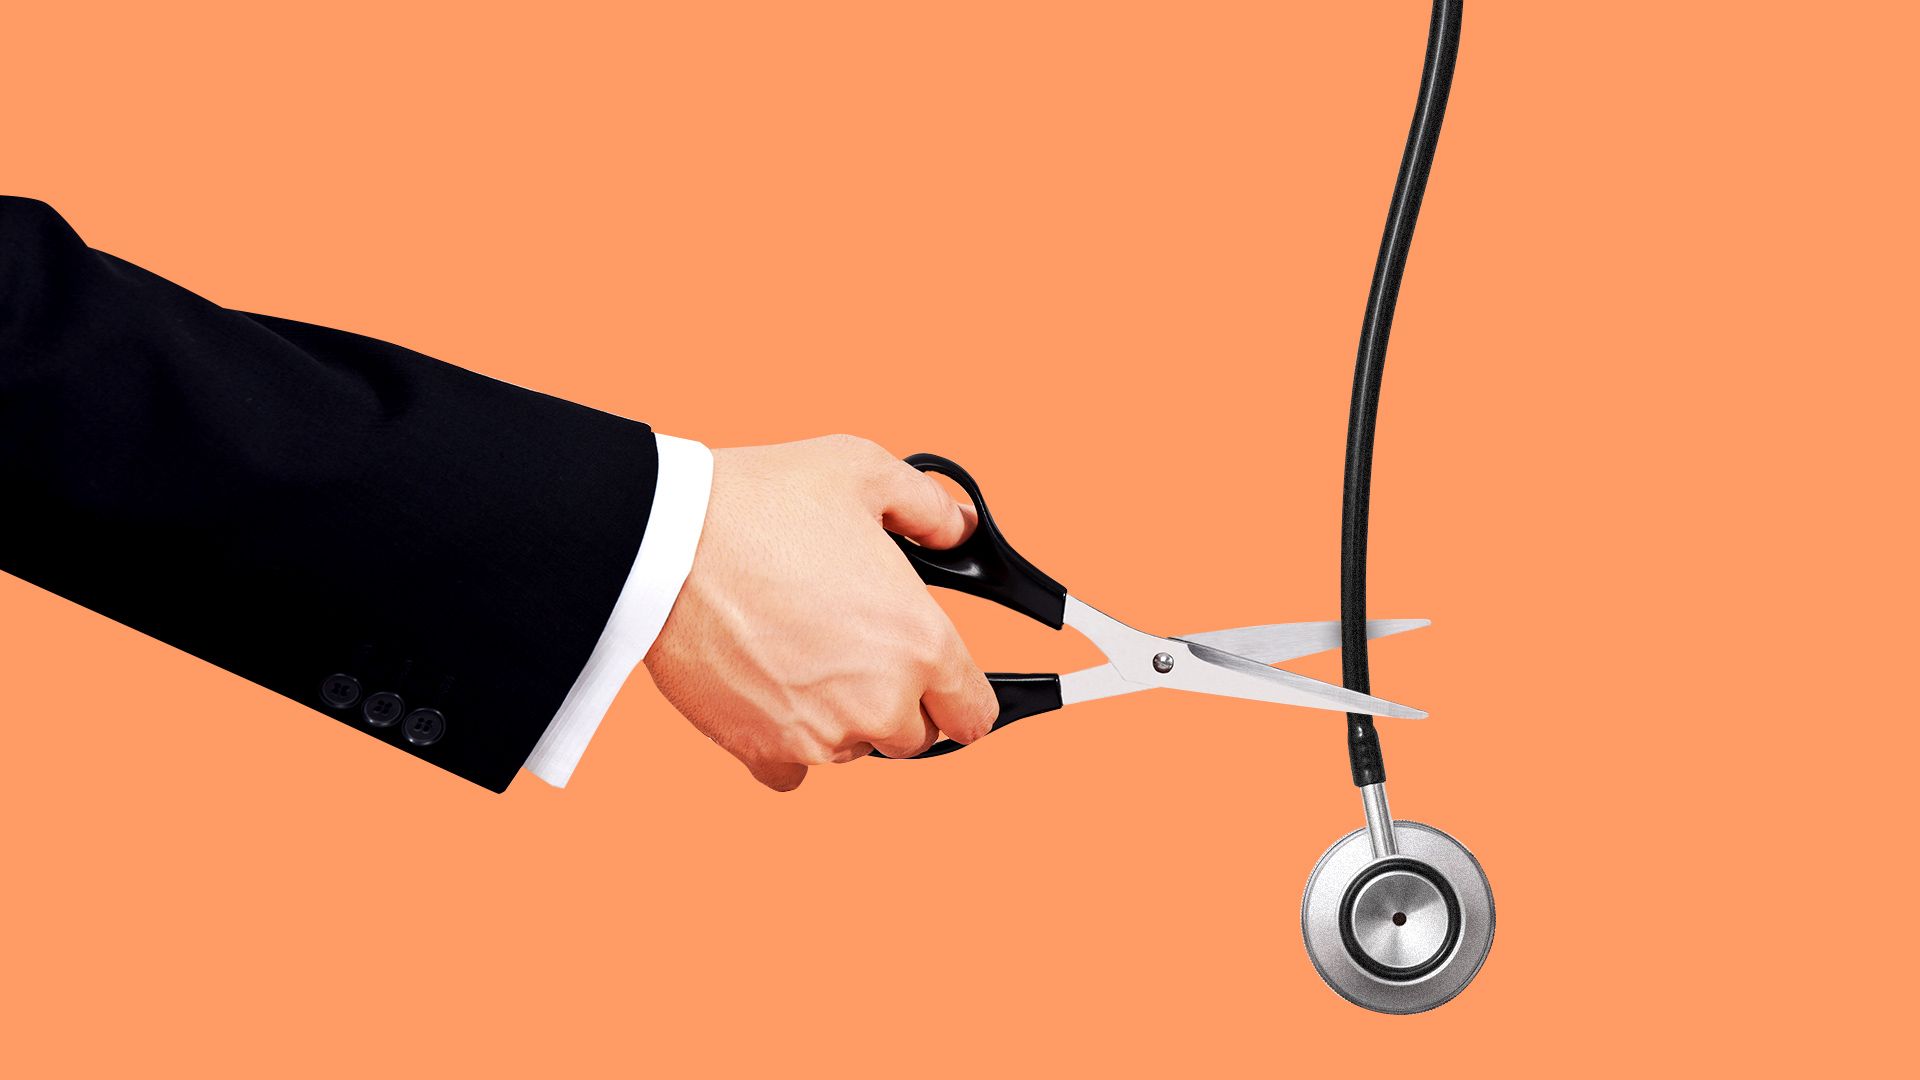 Illustration of a hand cutting a stethoscope with a pair of scissors.